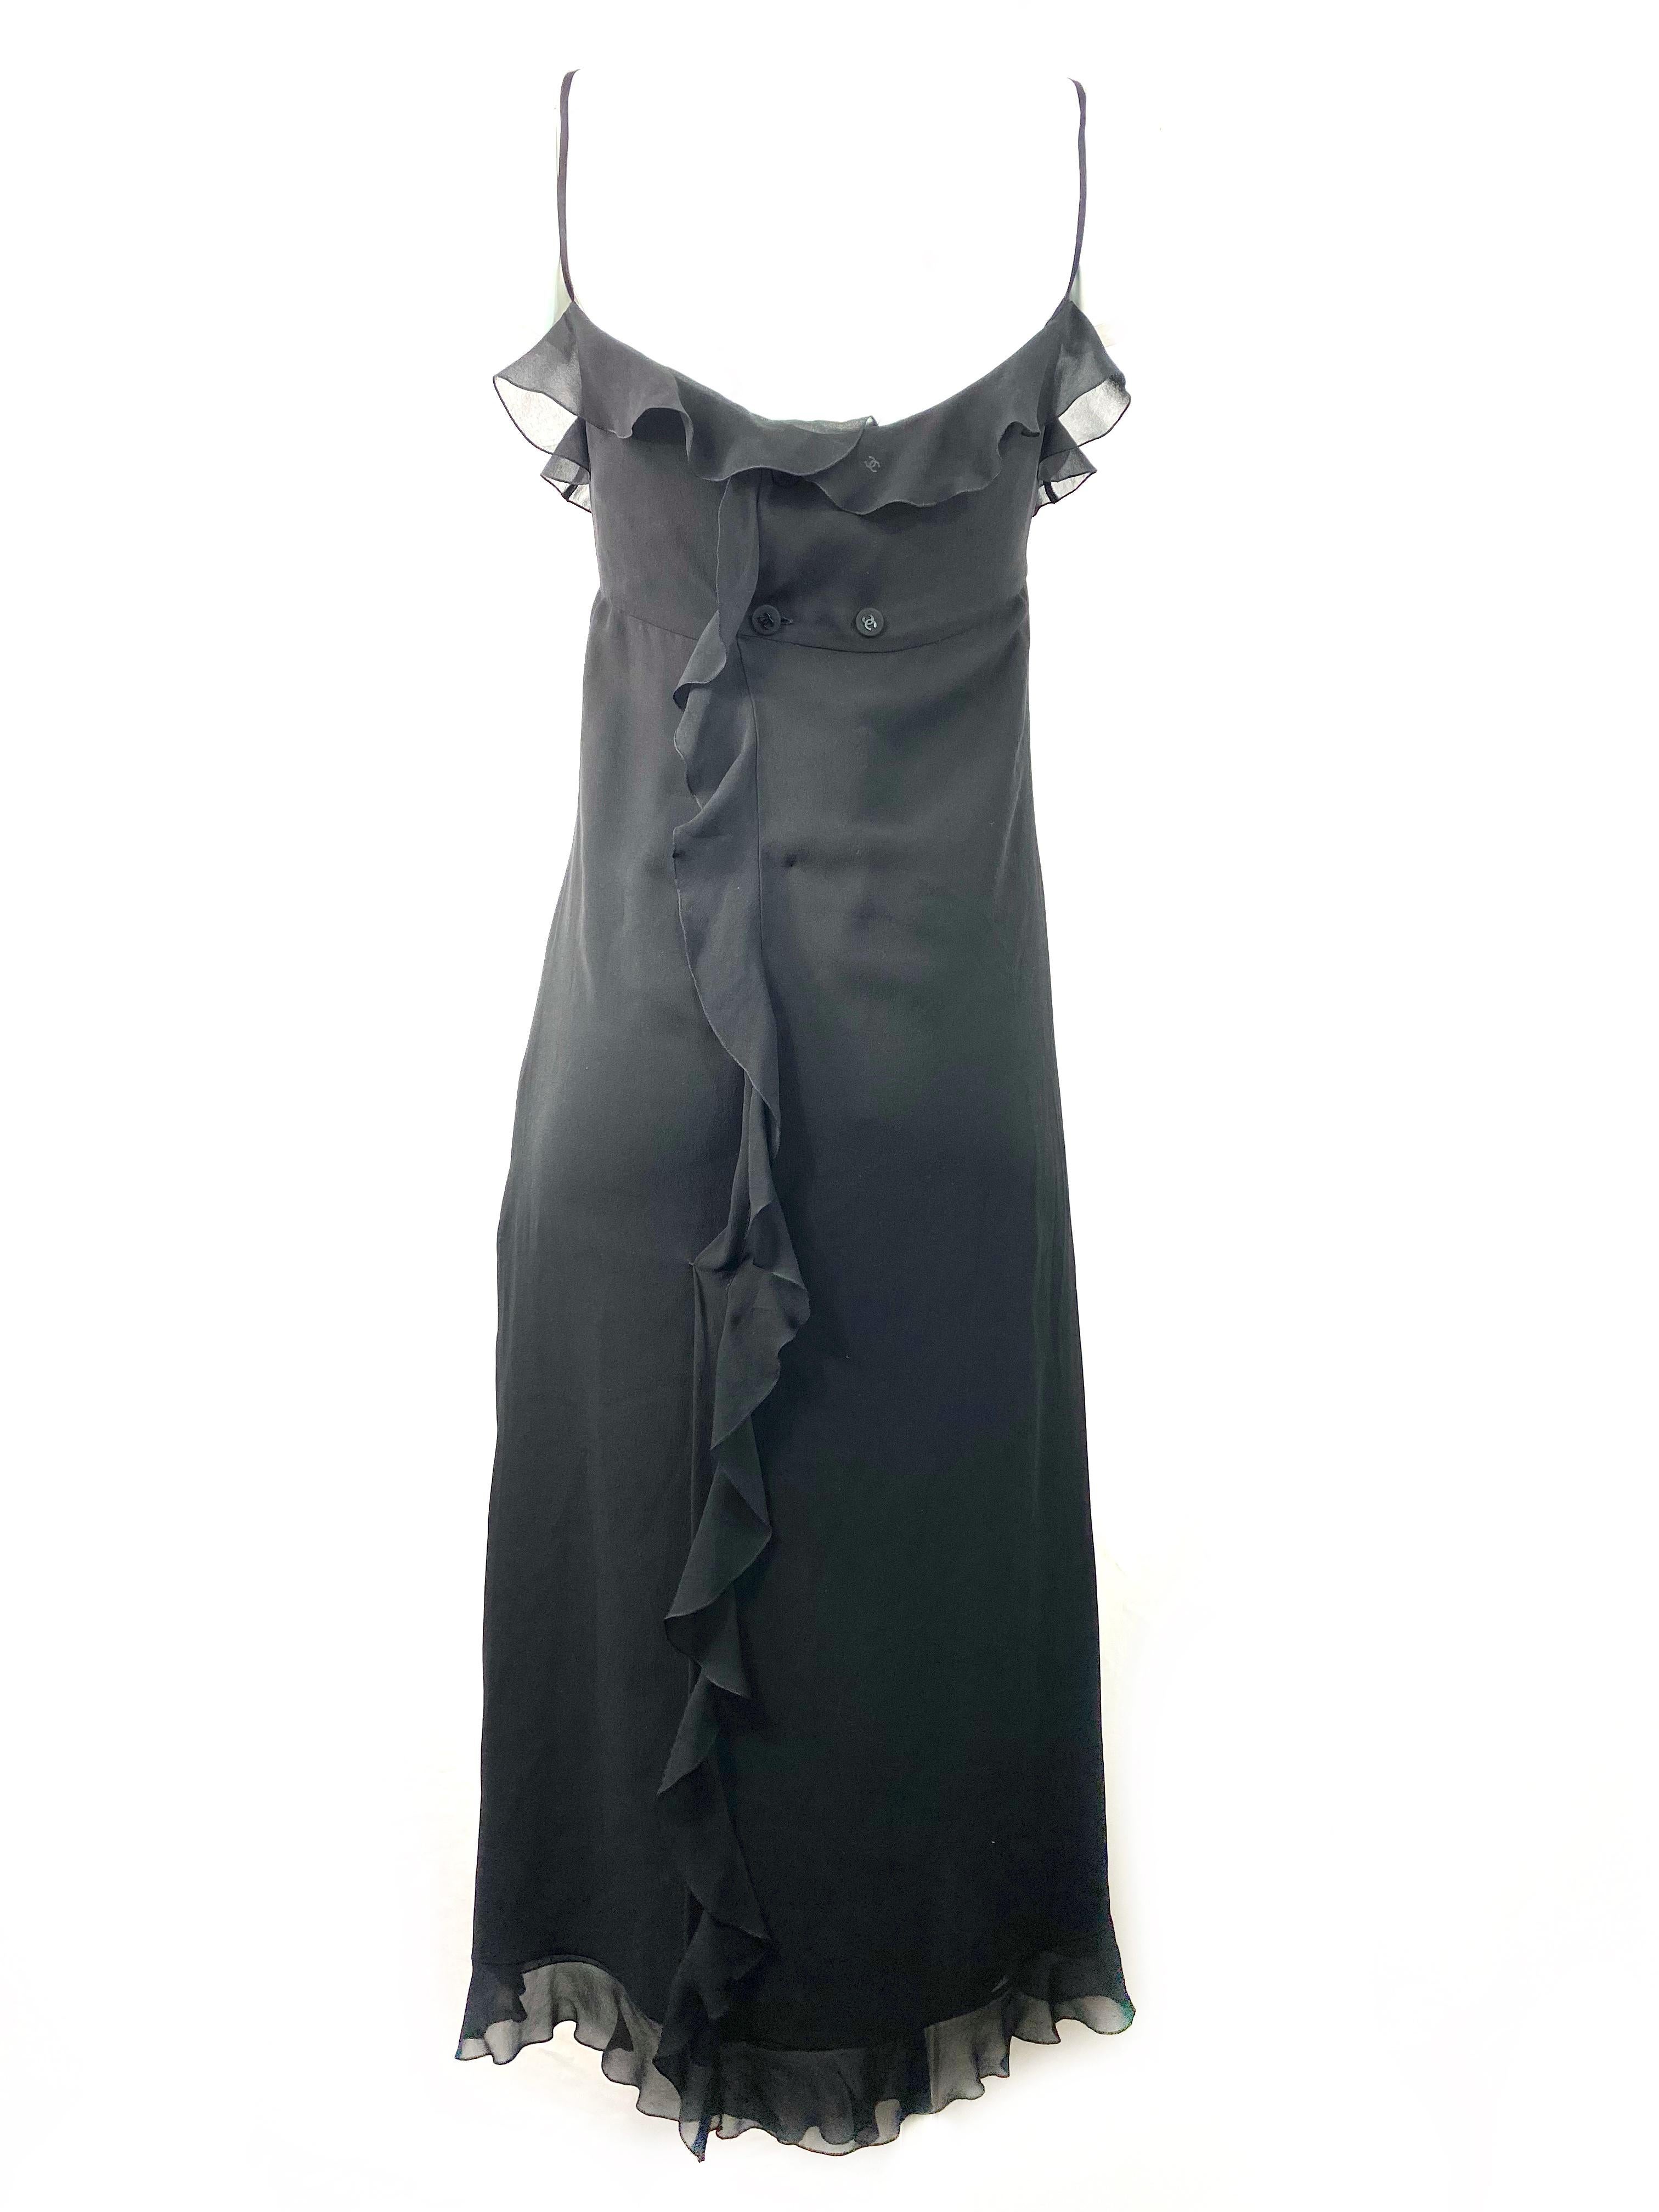 Chanel Boutique Black Silk Slip Dress Size 38 In Excellent Condition For Sale In Beverly Hills, CA